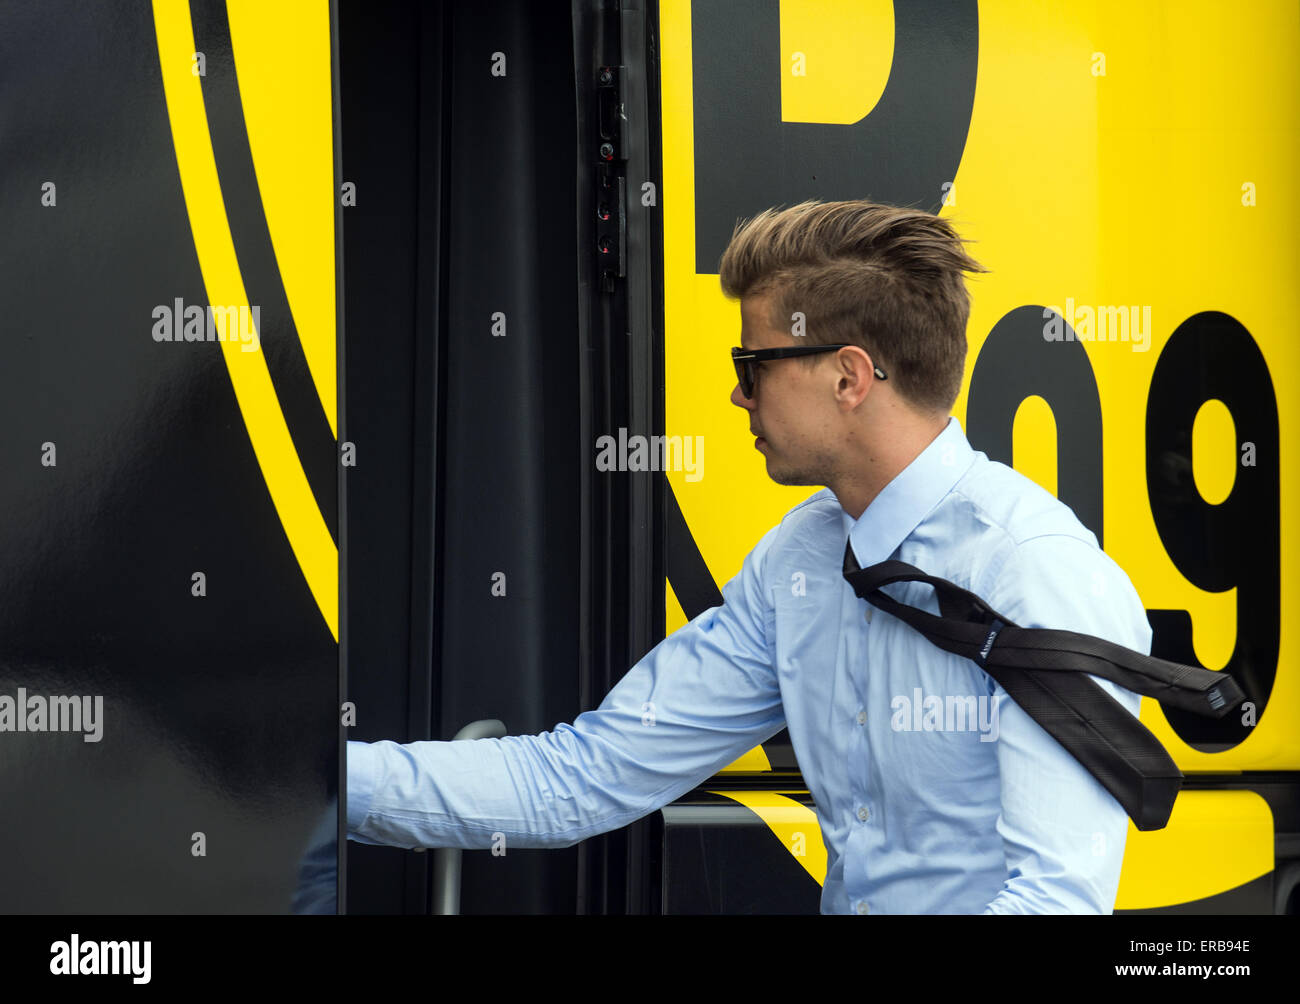 Dortmund, Germany. 31st May, 2015. Dortmund's goalkeeper Mitchell Langerak steps into the waiting coach at the airport in Dortmund, Germany, 31 May 2015. Soccer club Borussia Dortmund had lost against VfL Wolfsburg 1-3 in the DFB Cup finals held in Berlin on 30 May 2015. Photo: Bernd Thissen/dpa/Alamy Live News Stock Photo